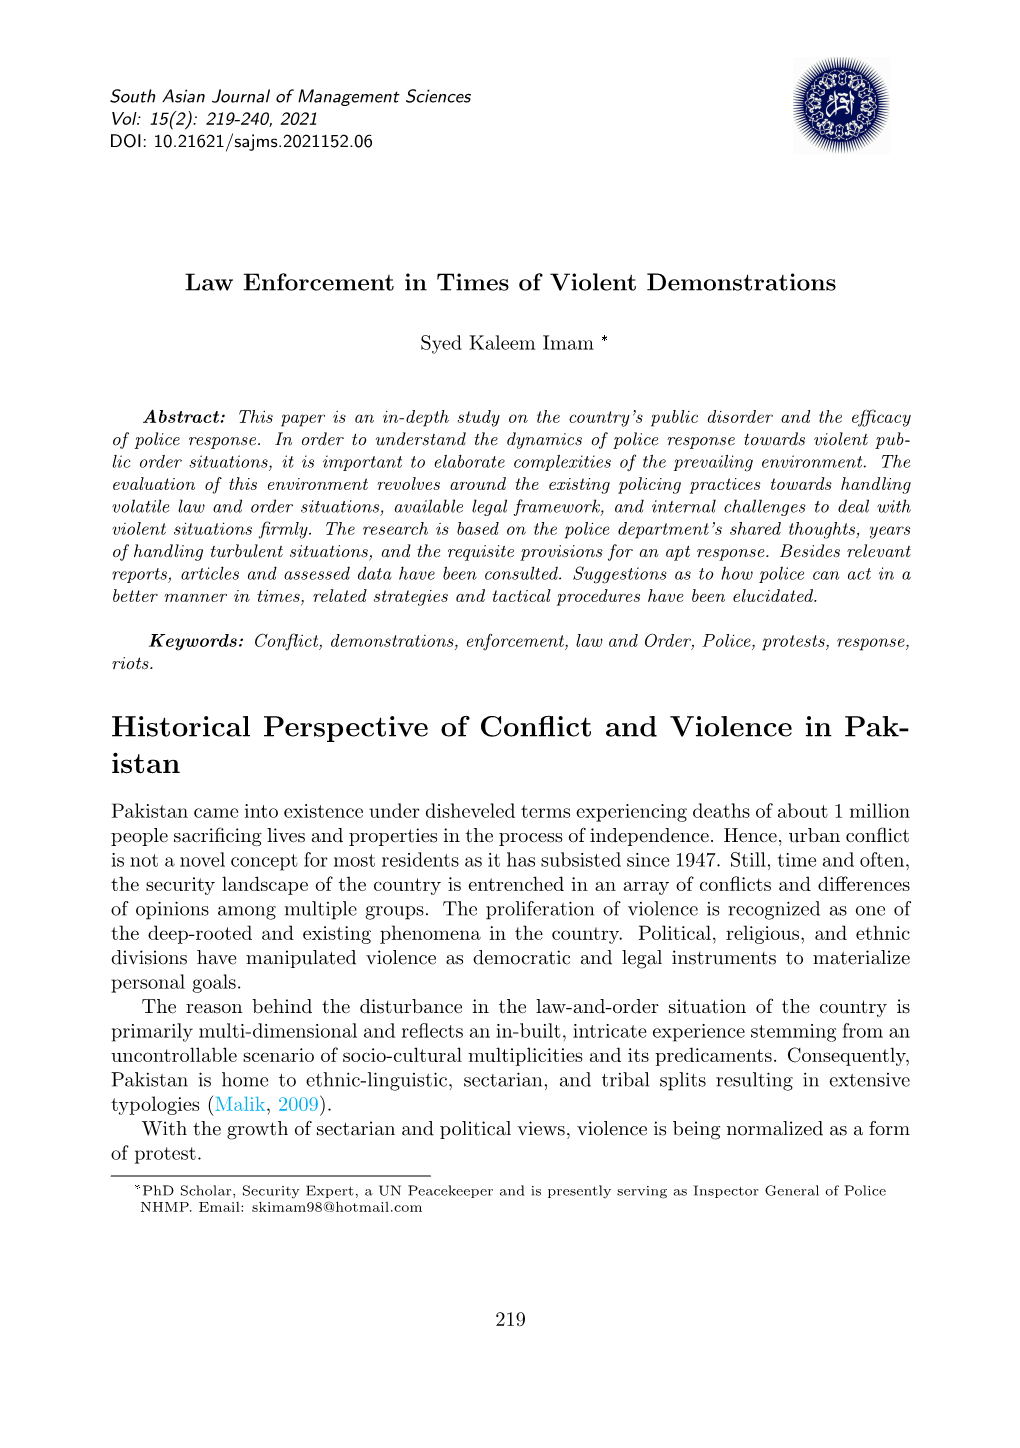 Historical Perspective of Conflict and Violence in Pak- Istan